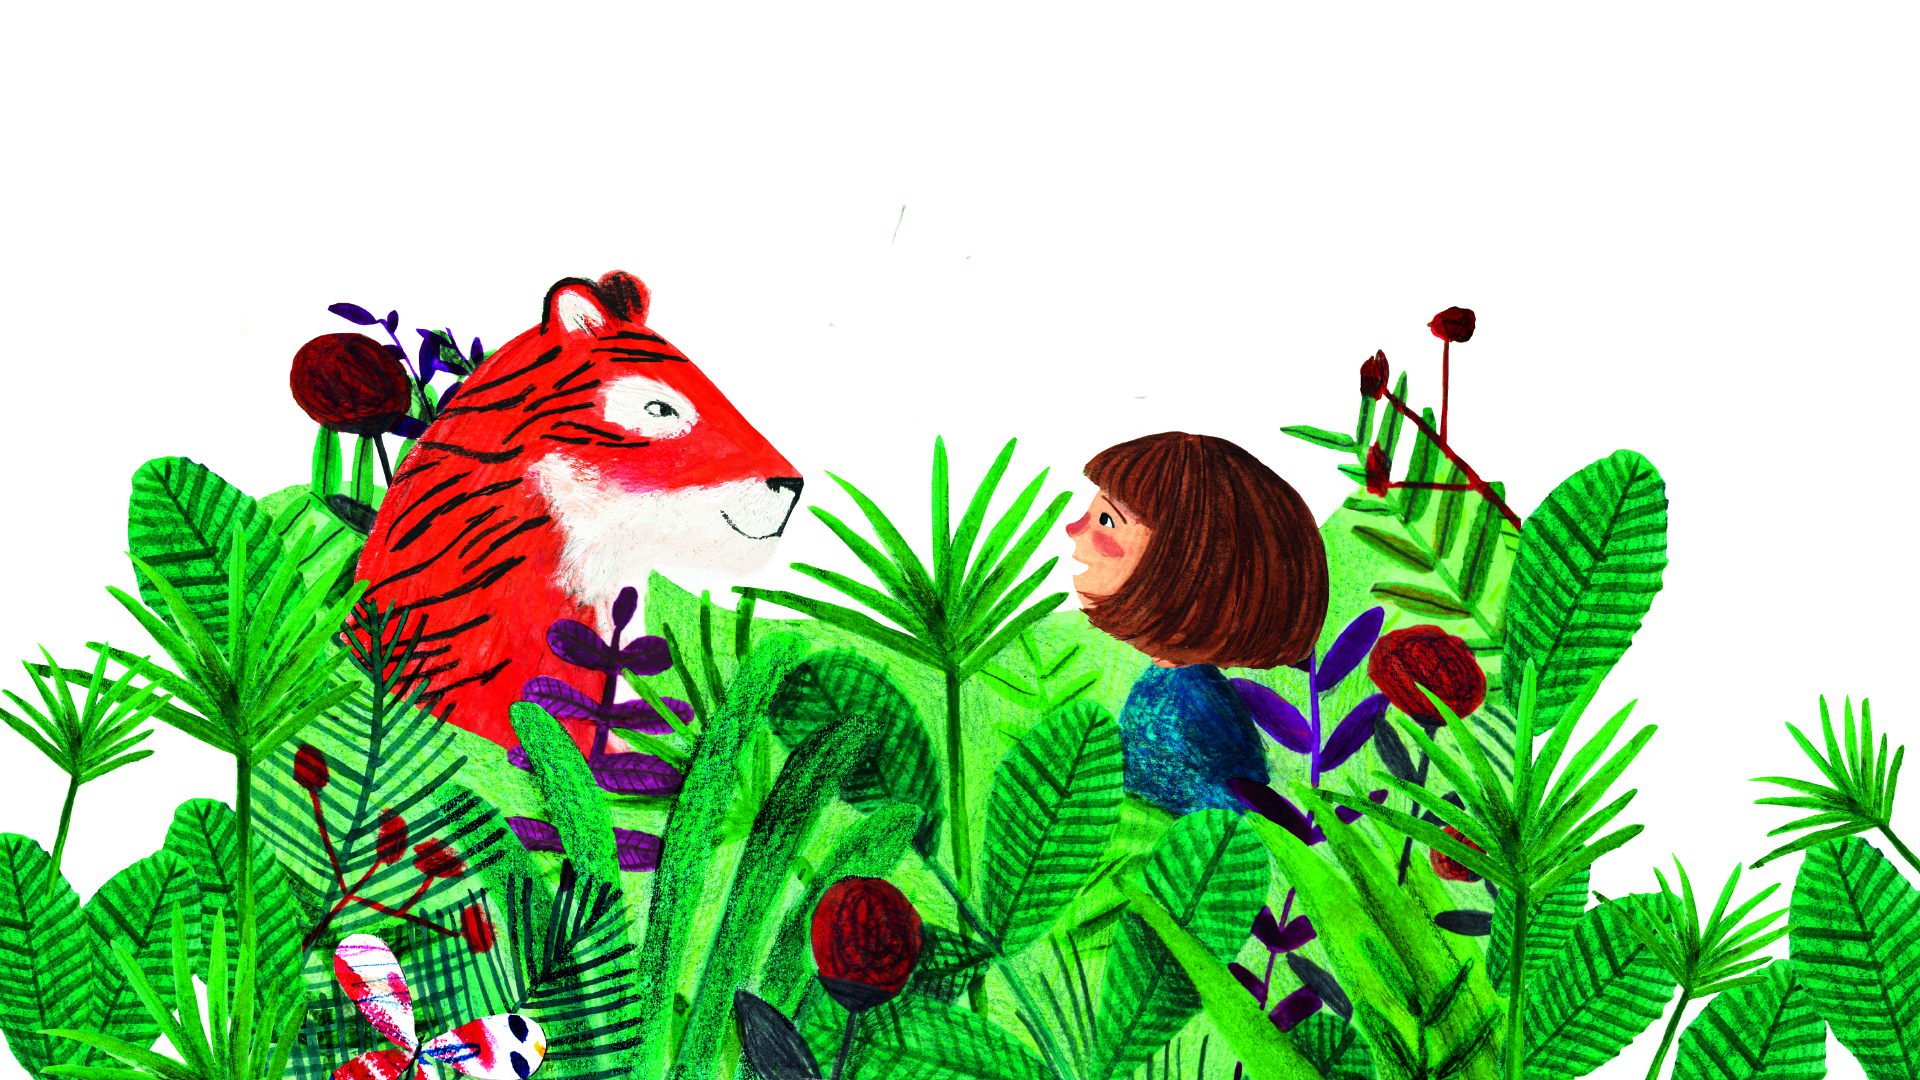 An illustration shows a child and a tiger stood among garden greenery.